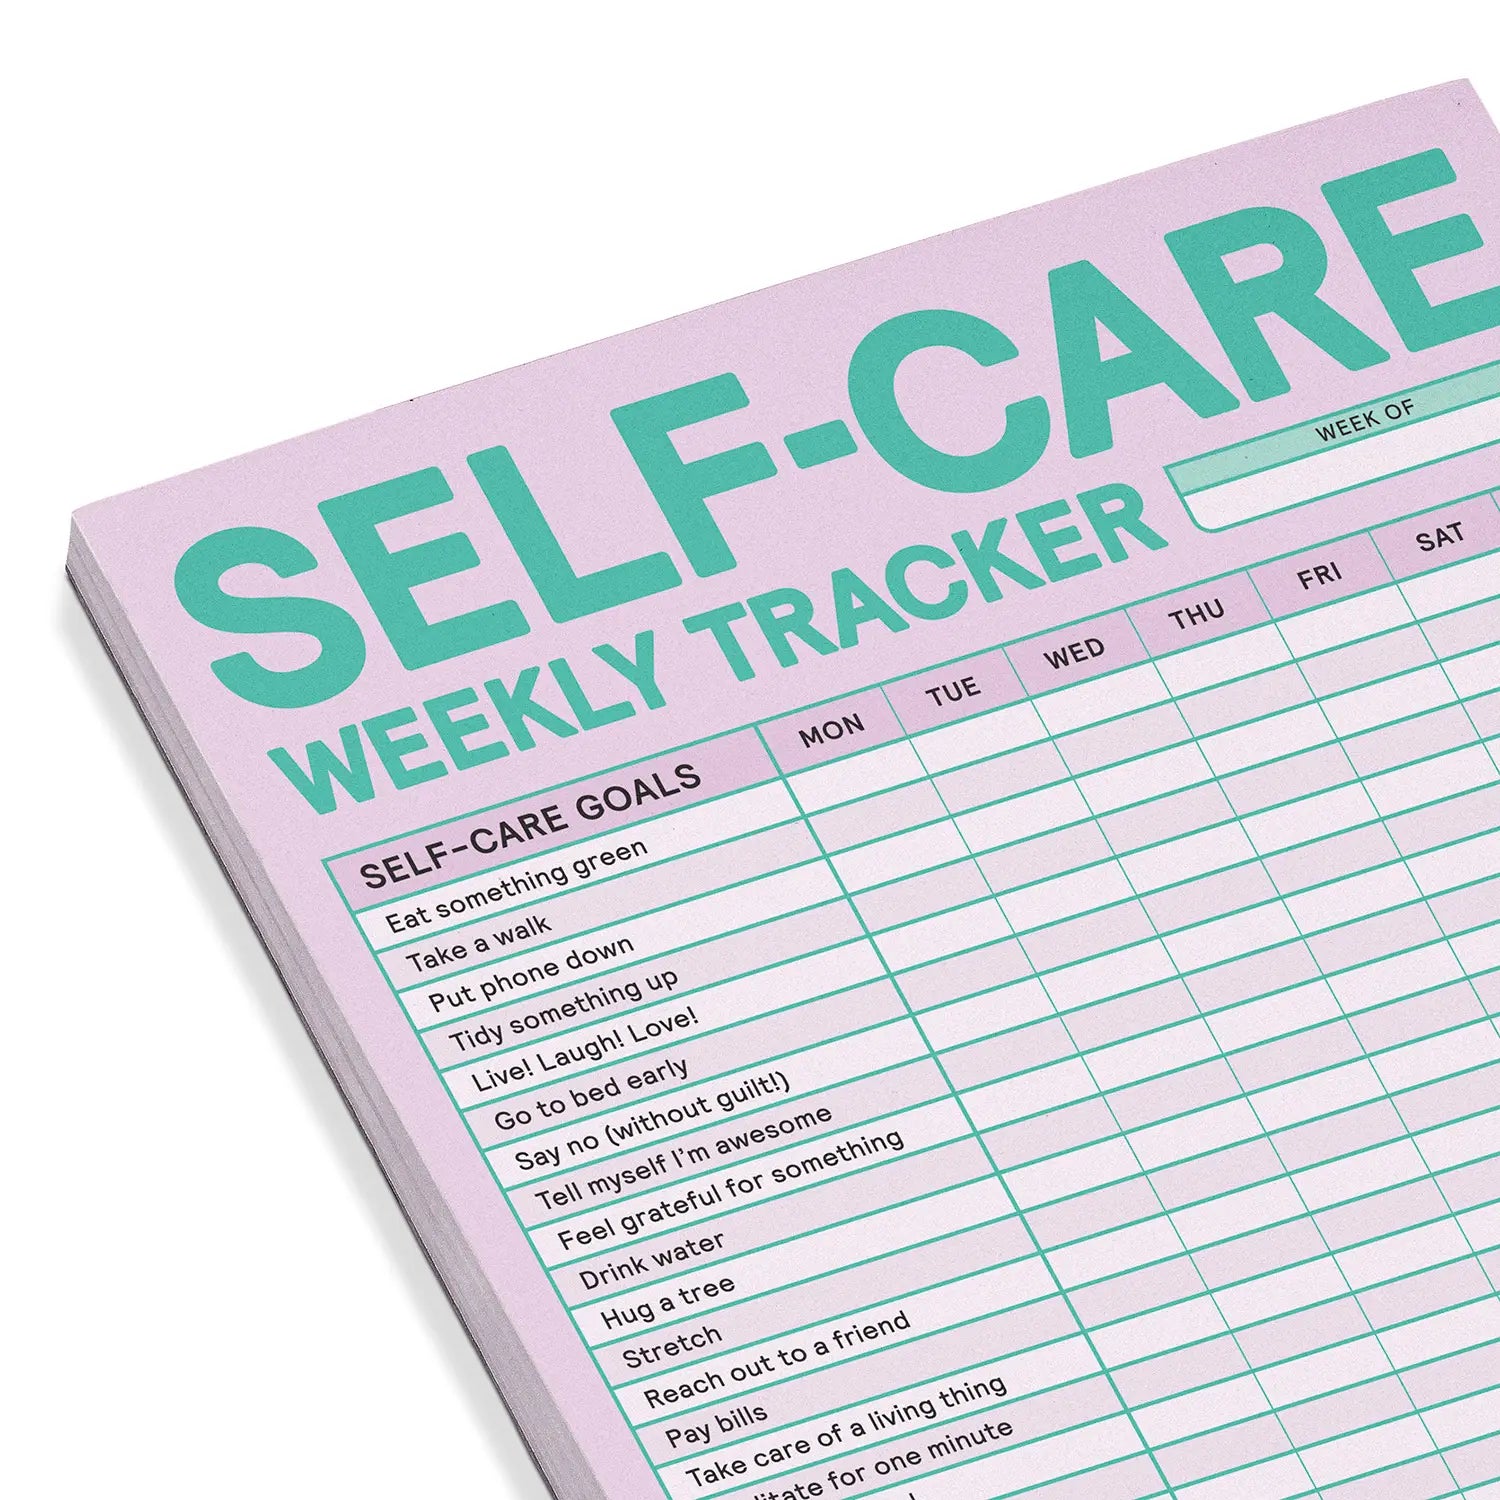 self-care weekly tracker notepad